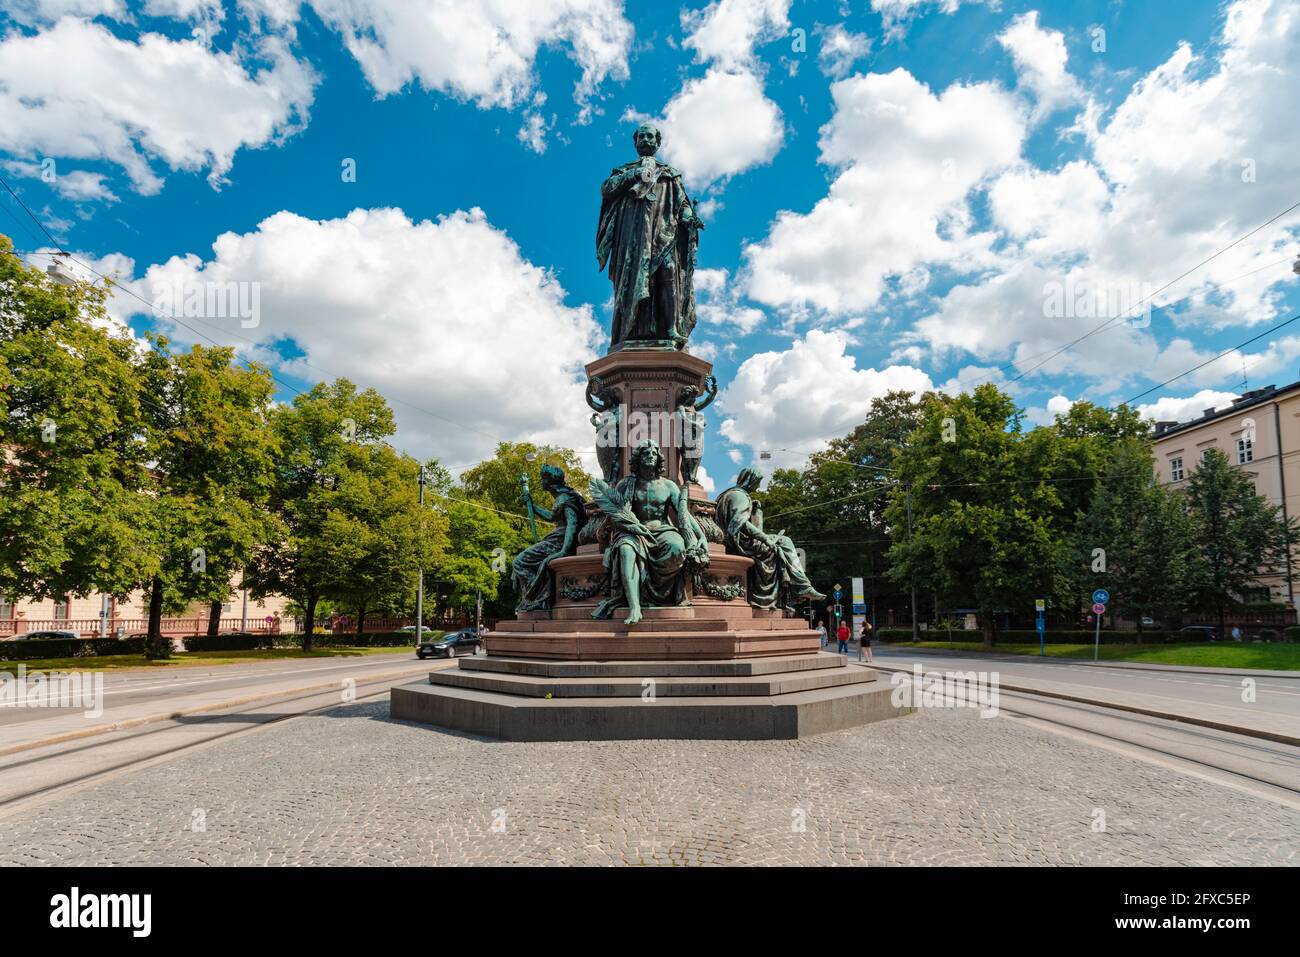 Memorial of King Maximilian II in front of sky at Munich, Bavaria, Germany Stock Photo